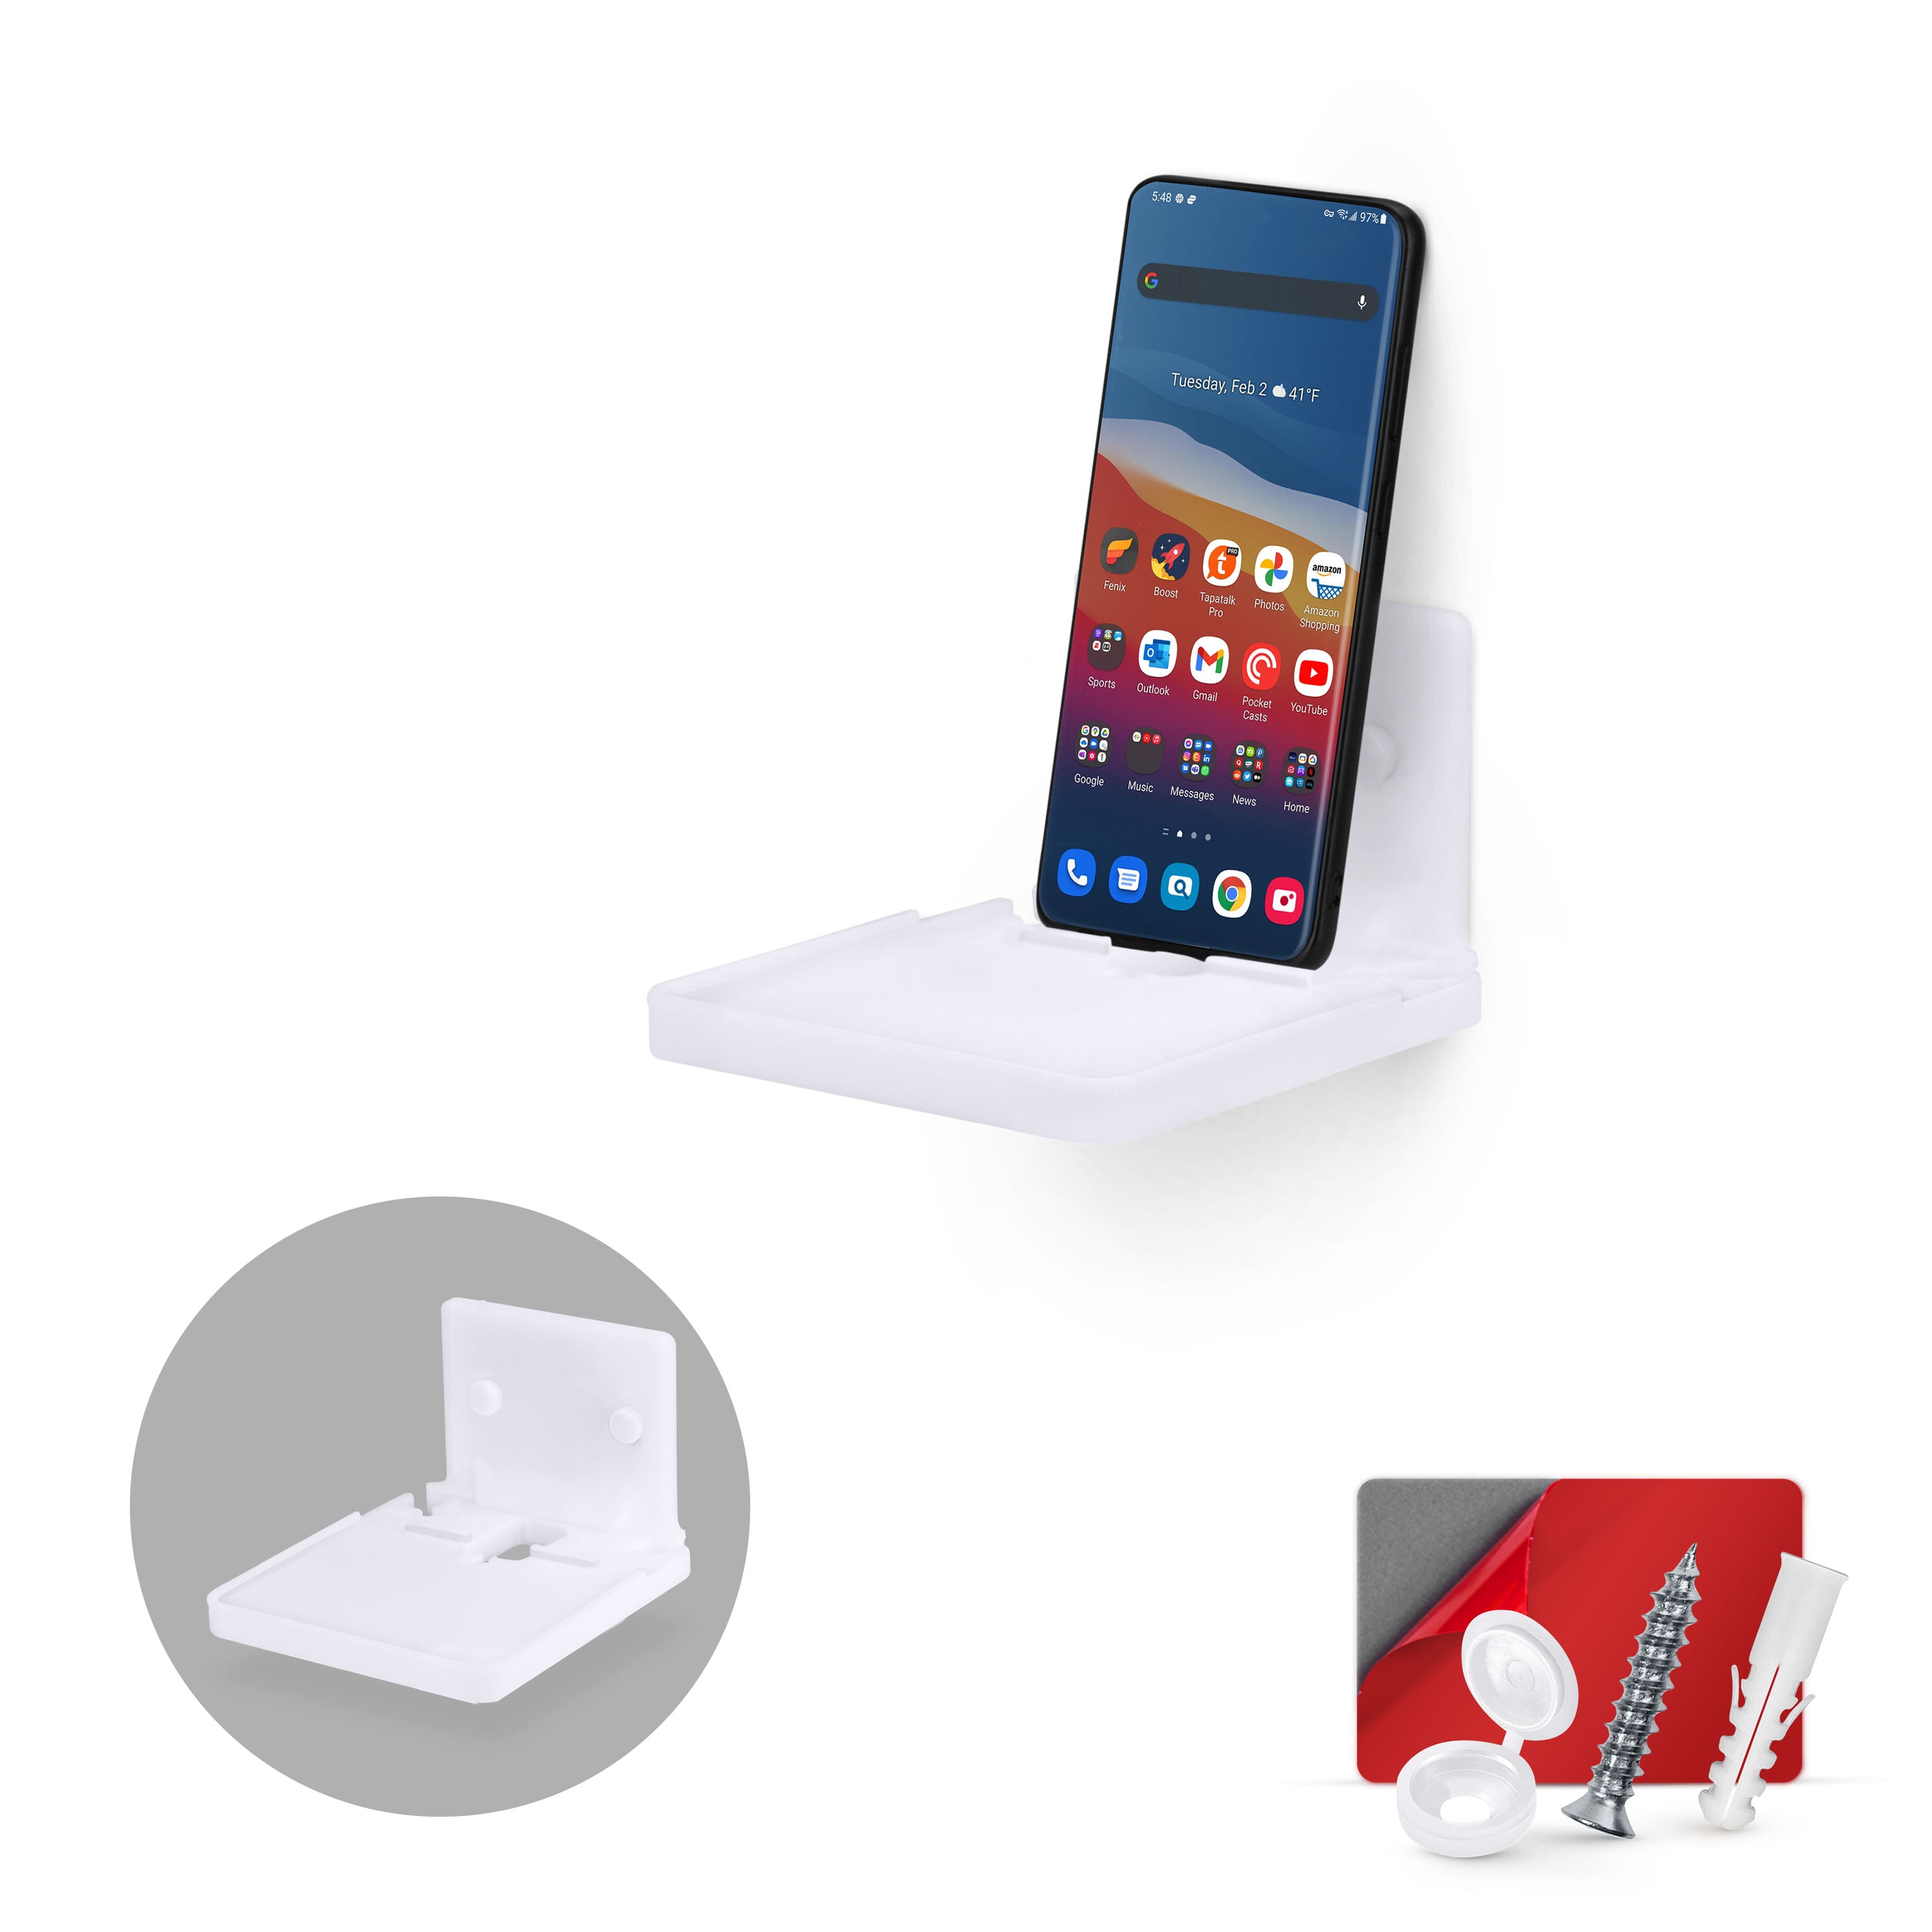 4 Small Wall Mount Shelf with Tablet & Phone Holder, Use for Baby